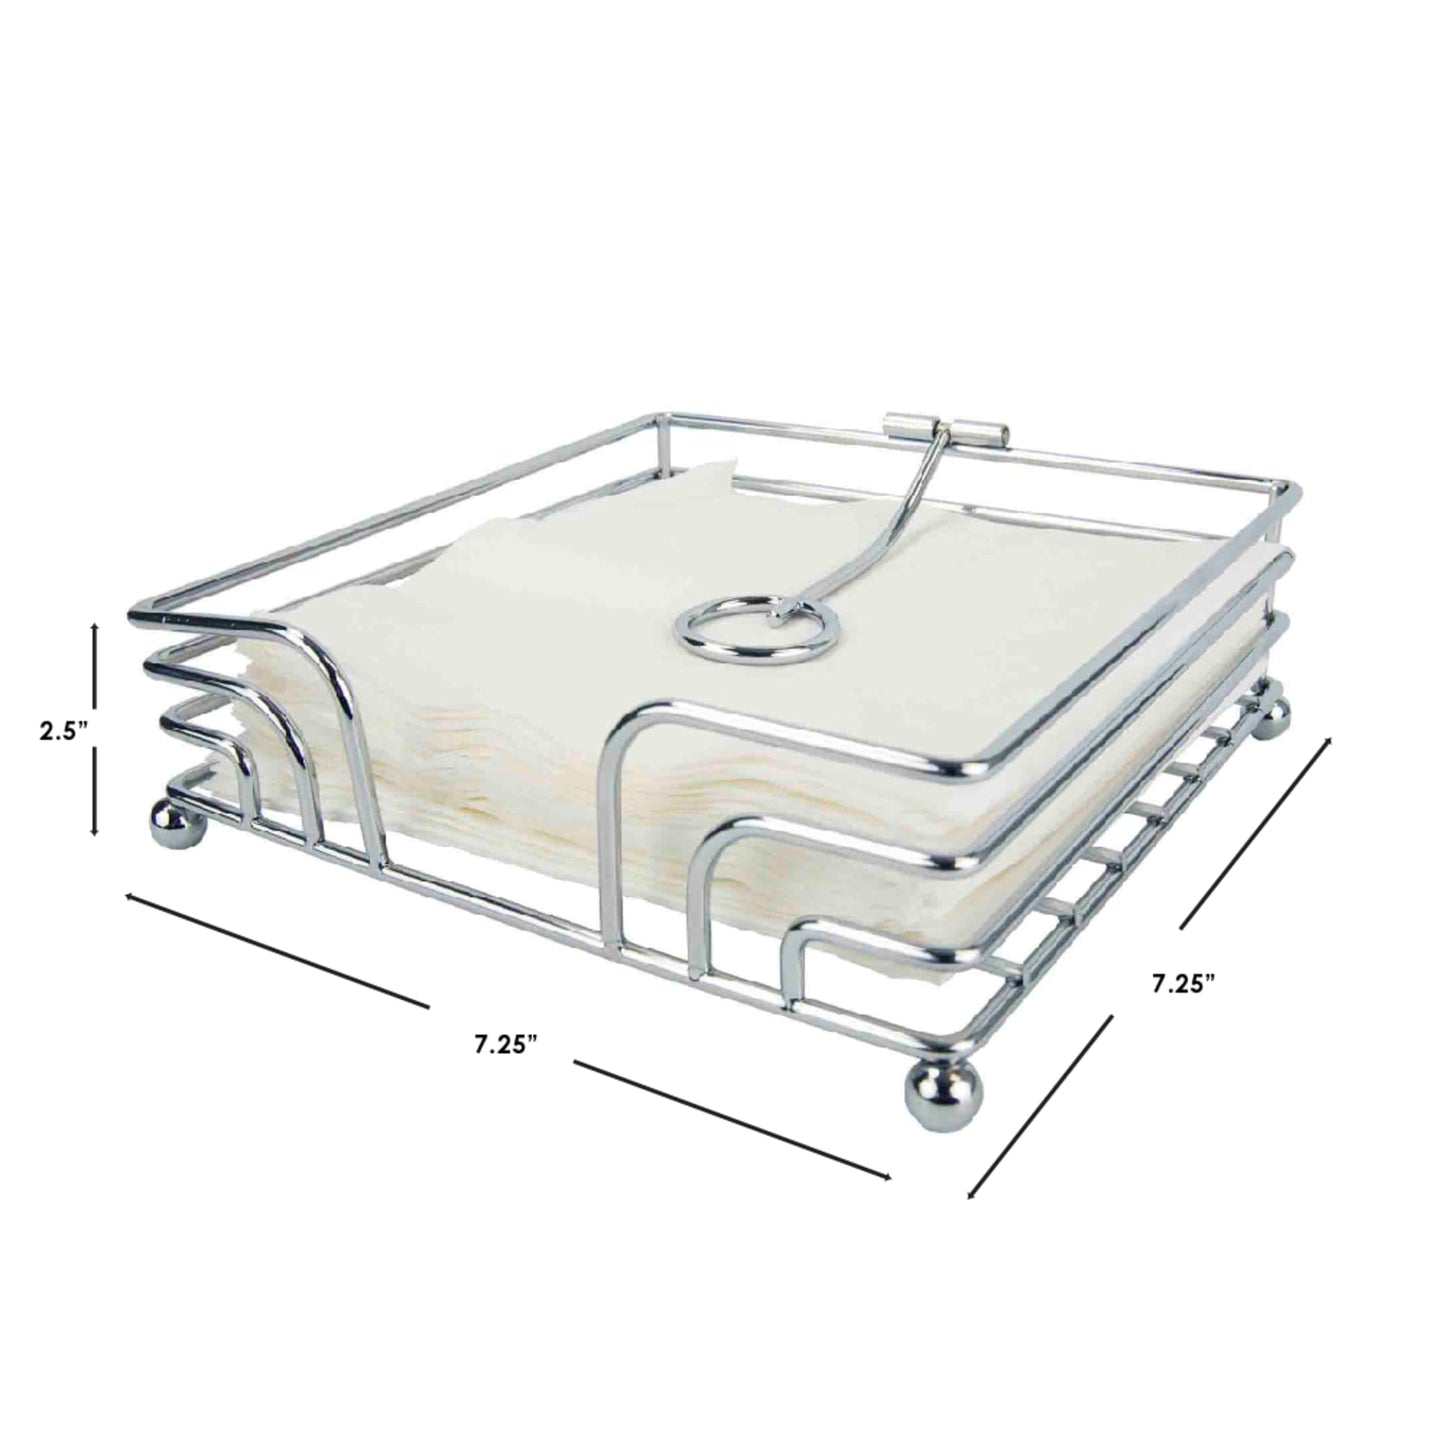 Chrome Plated Steel  Flat Napkin Holder with Weighted Pivoted Arm